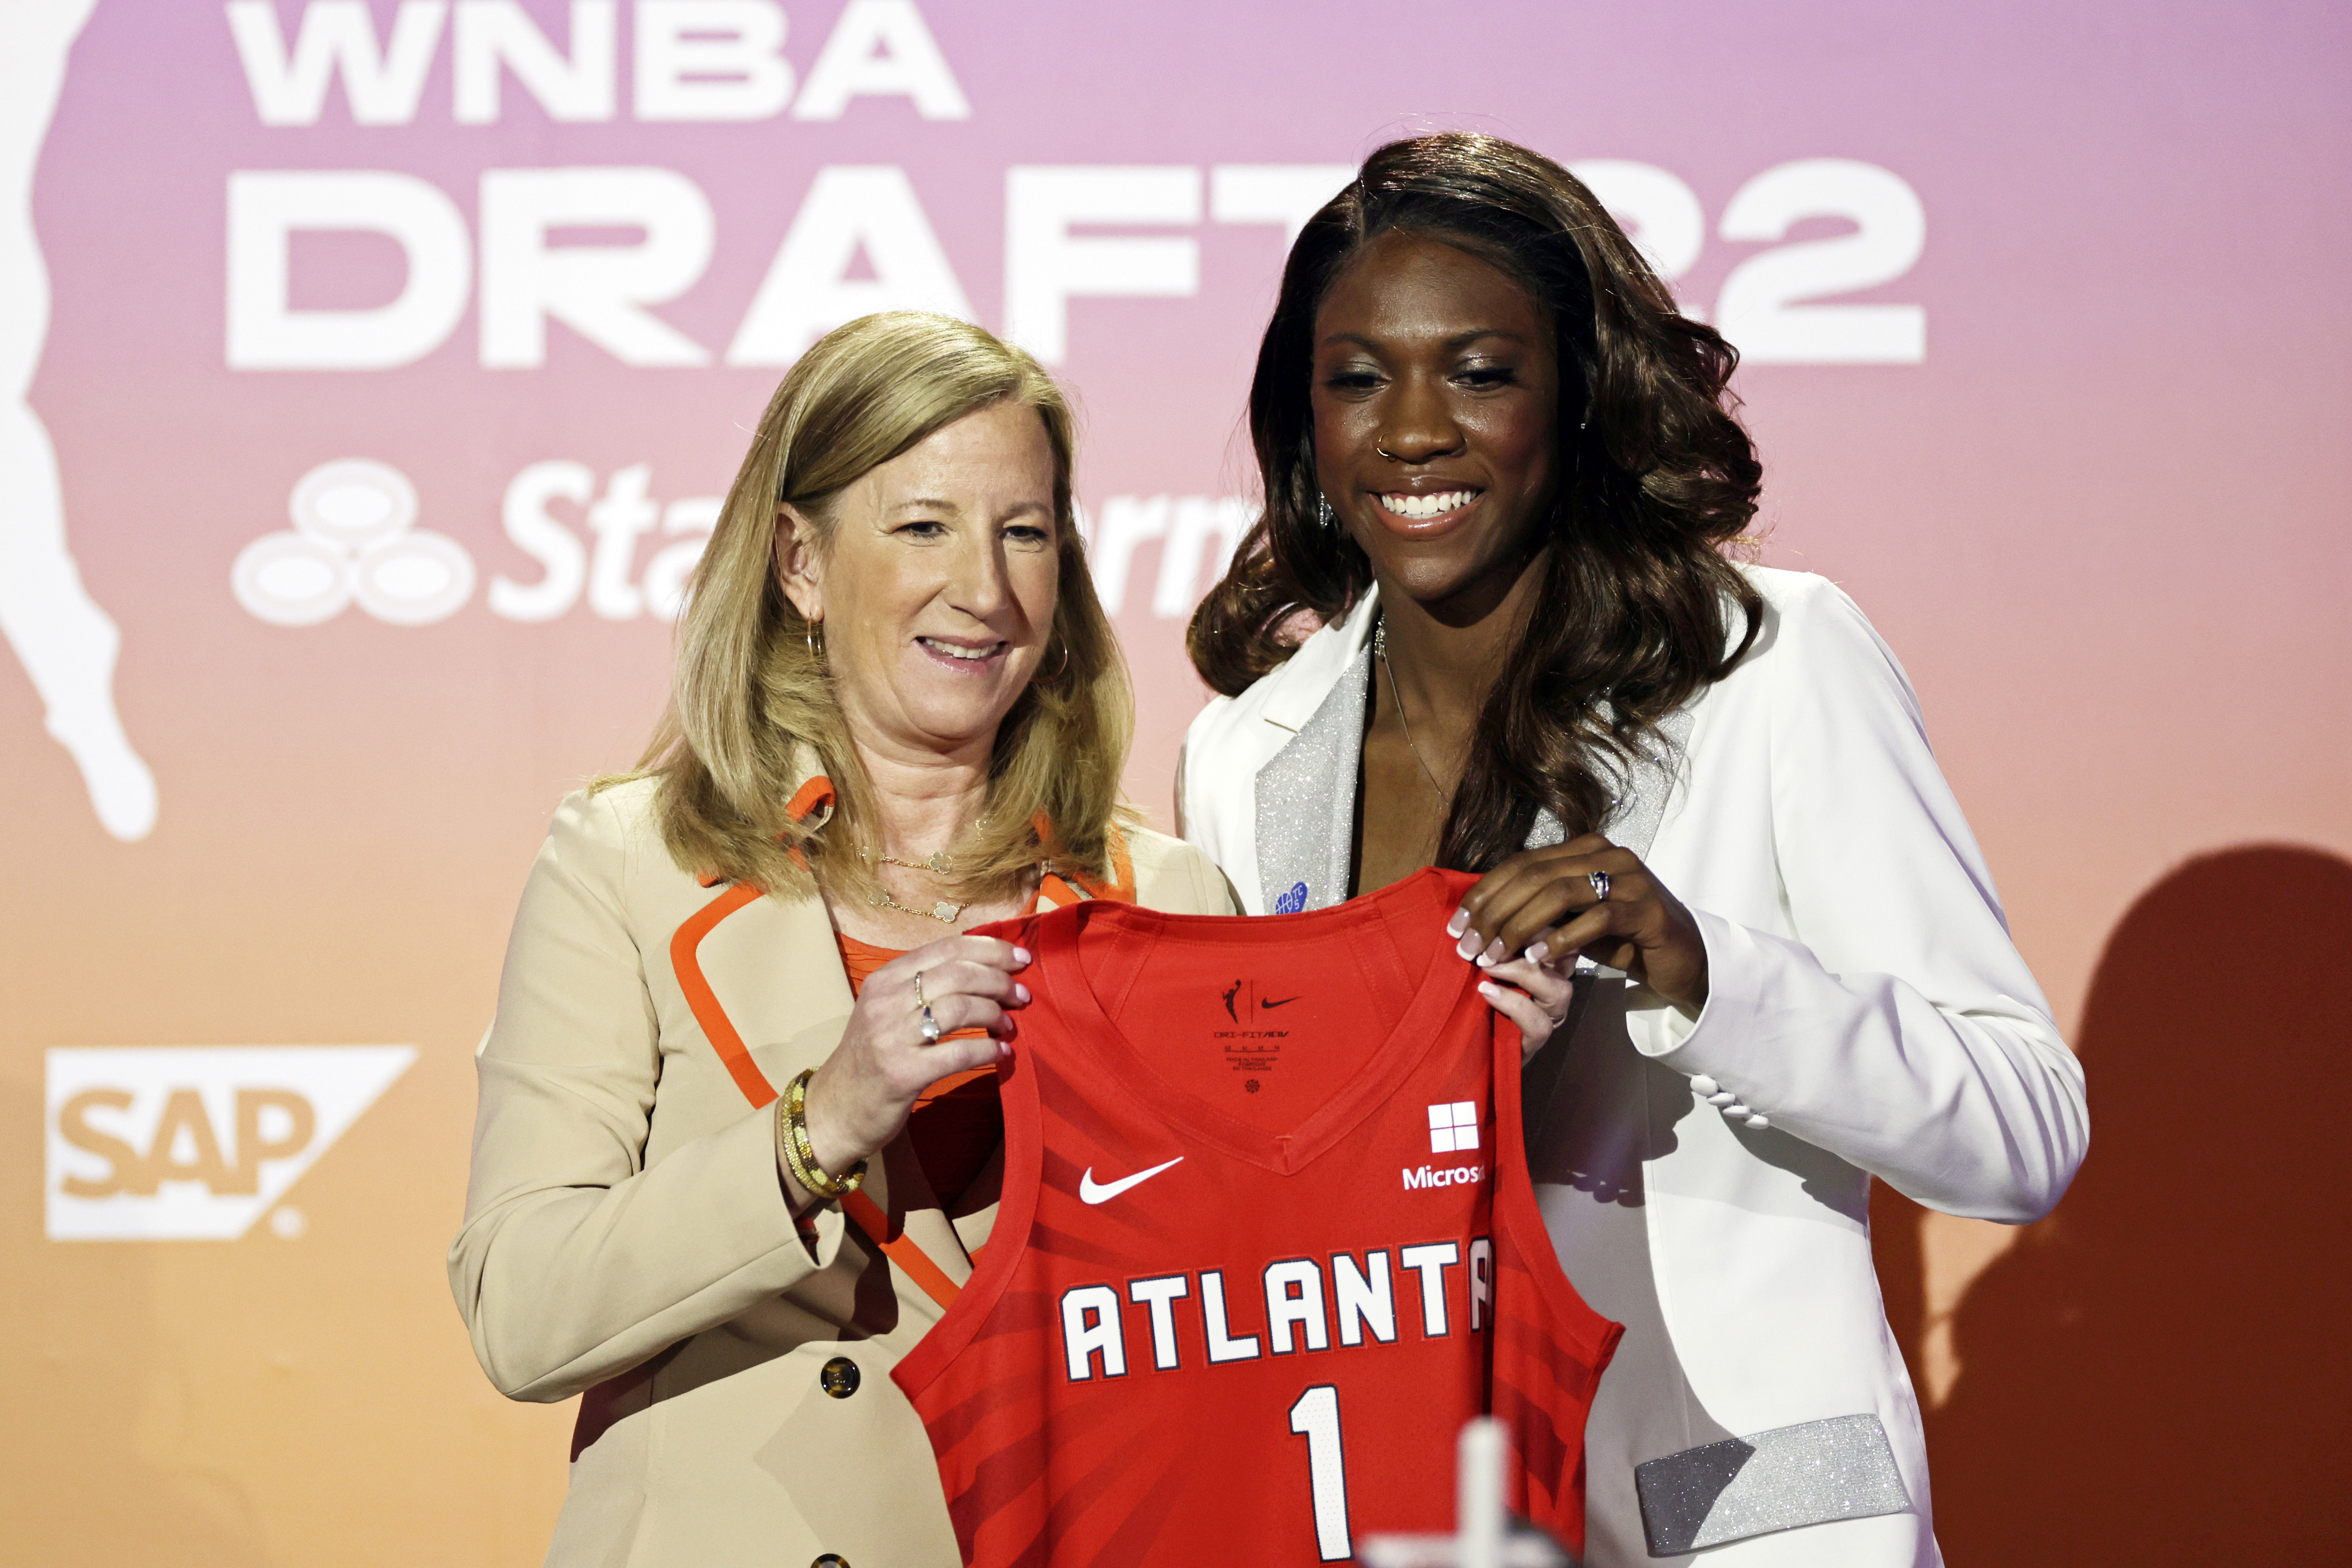 2022 WNBA Draft Results: Complete Round-By-Round Selections and Twitter Reaction